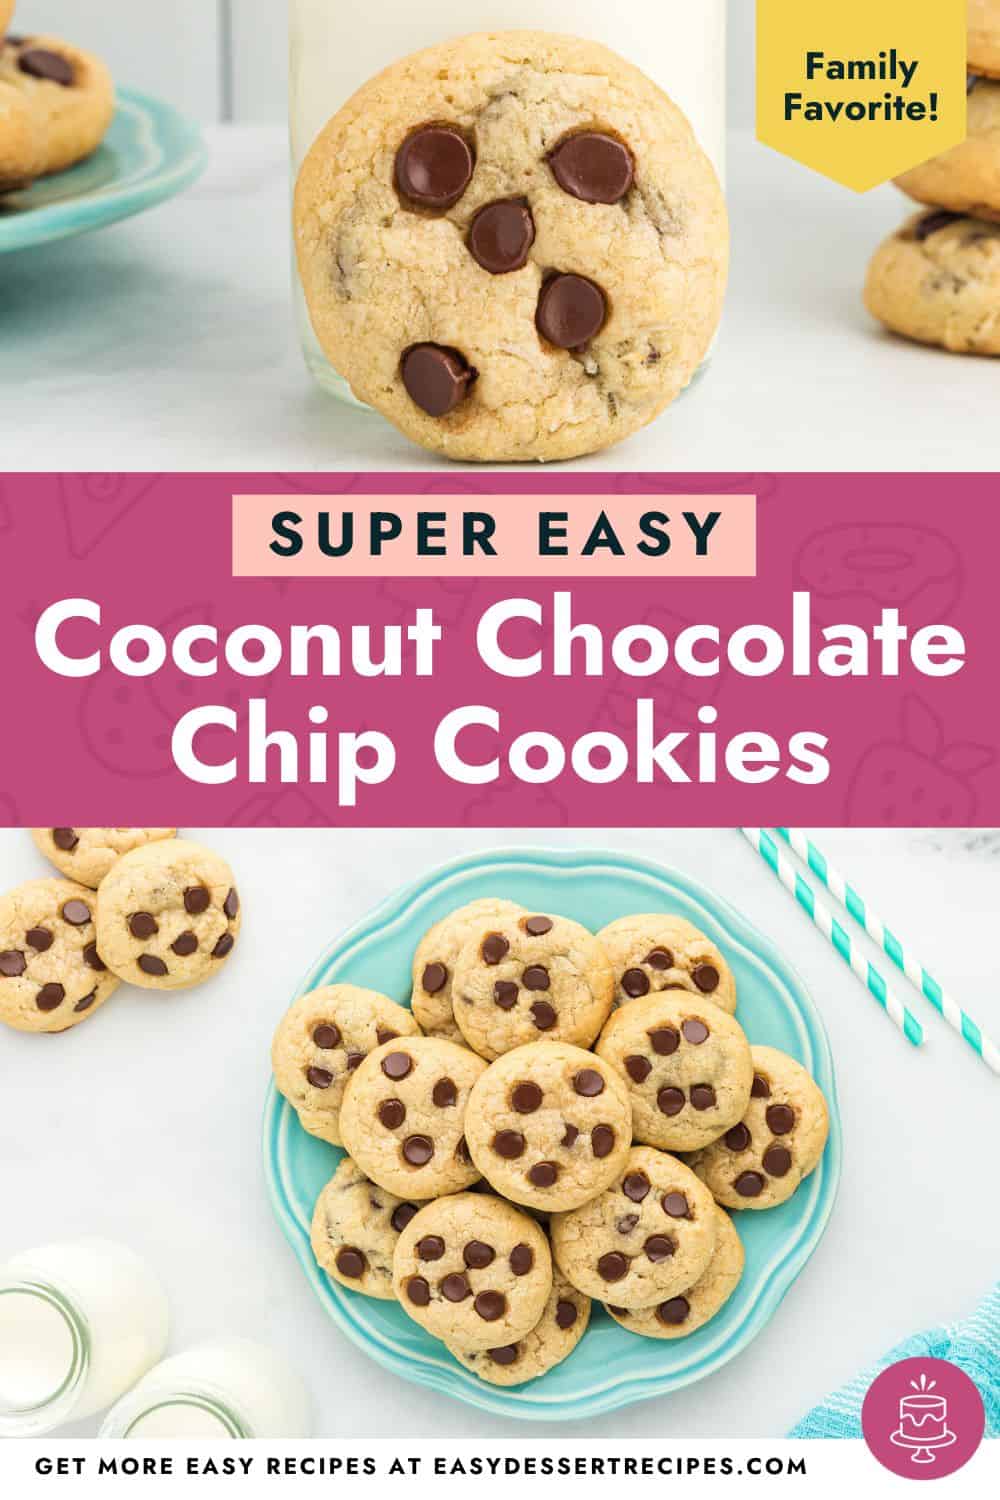 Super easy coconut chocolate chip cookies.